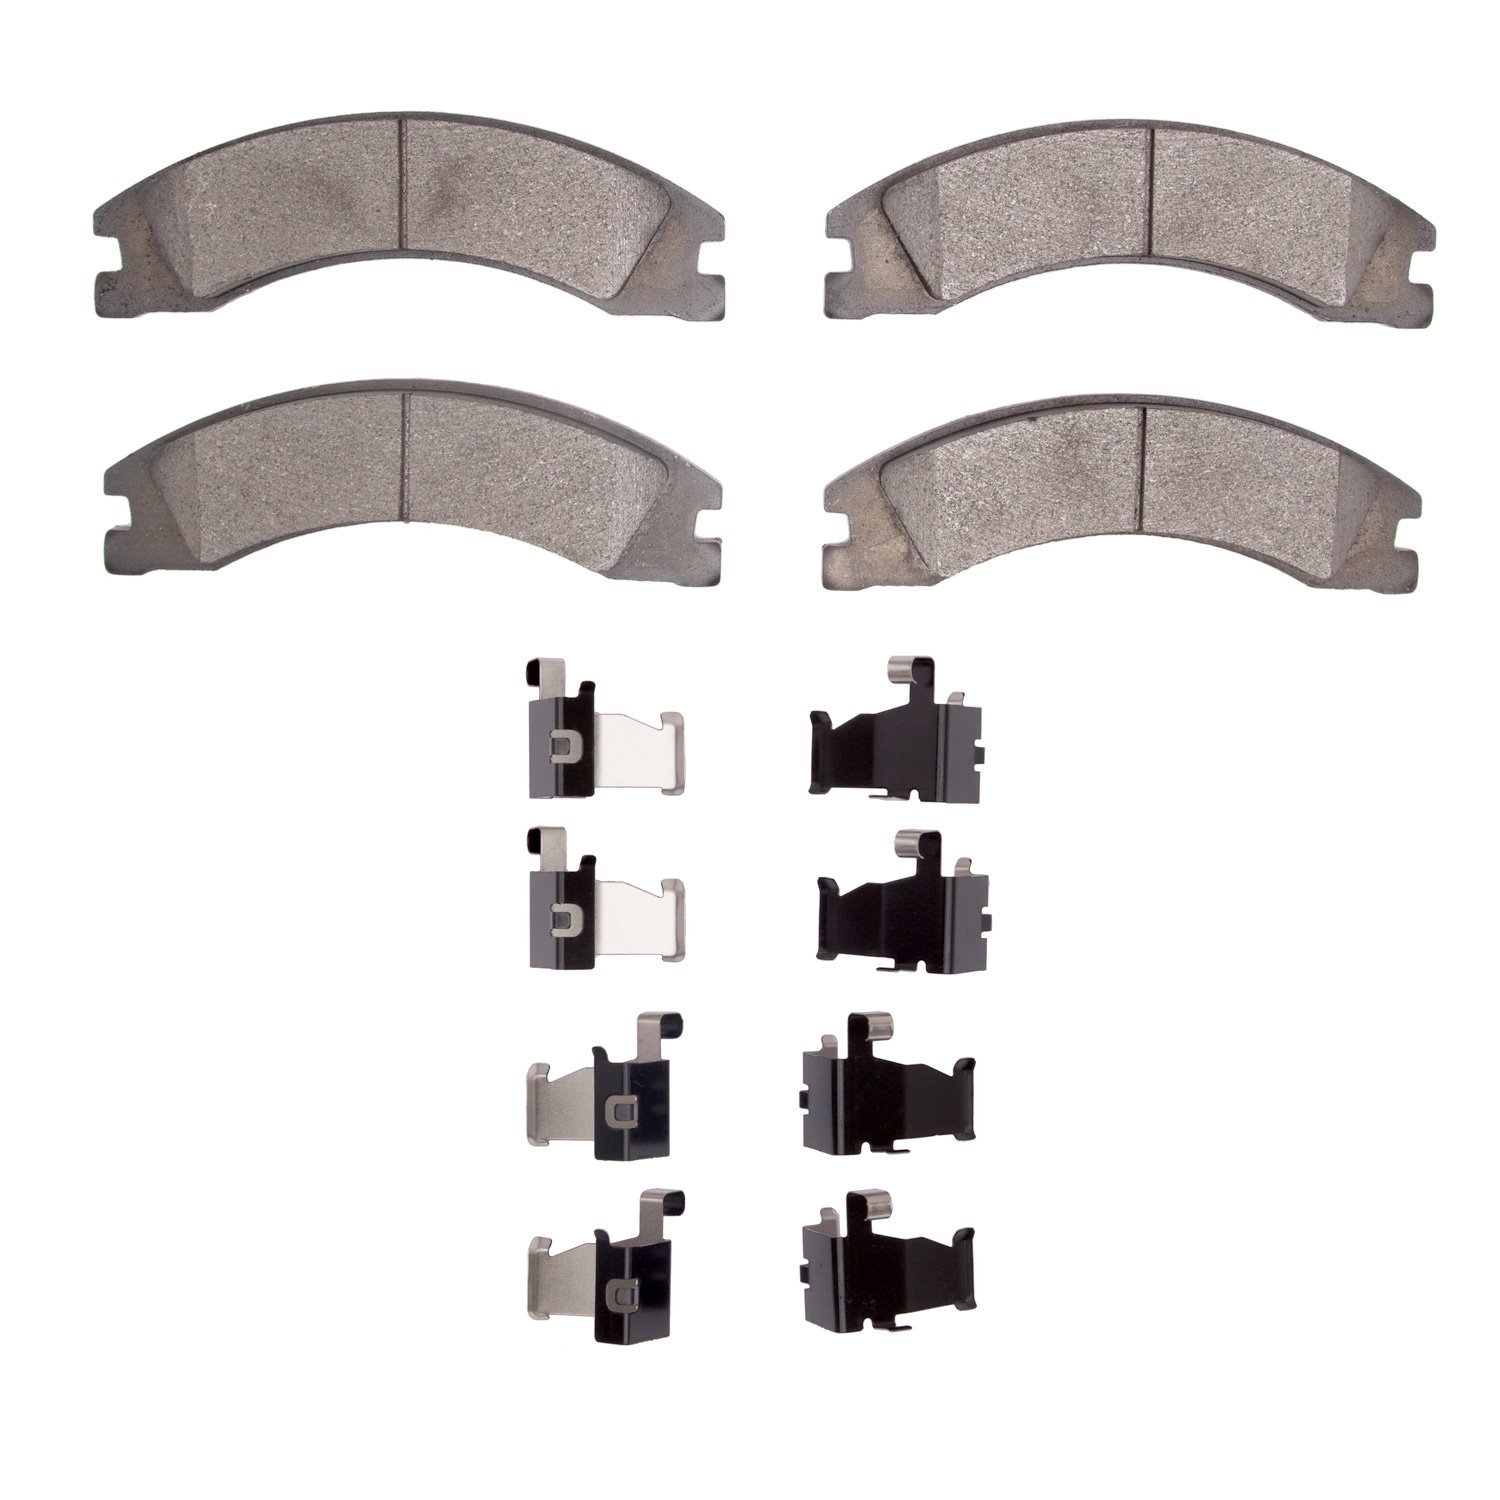 1214-1330-01 Heavy-Duty Brake Pads & Hardware Kit, Fits Select Ford/Lincoln/Mercury/Mazda, Position: Rear,Rr